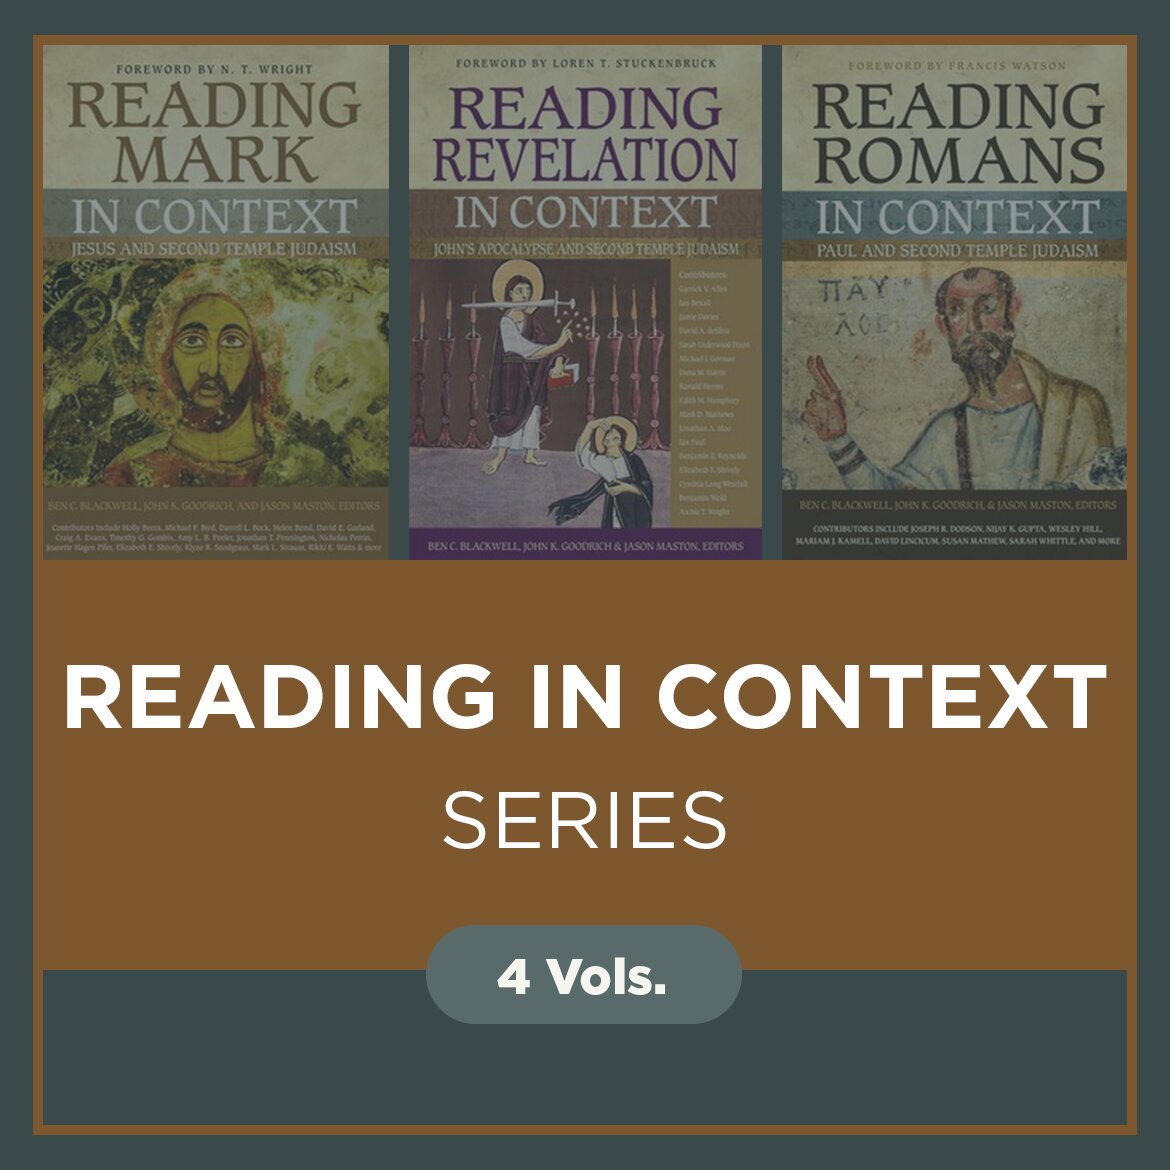 Reading in Context Series (4 vols.)